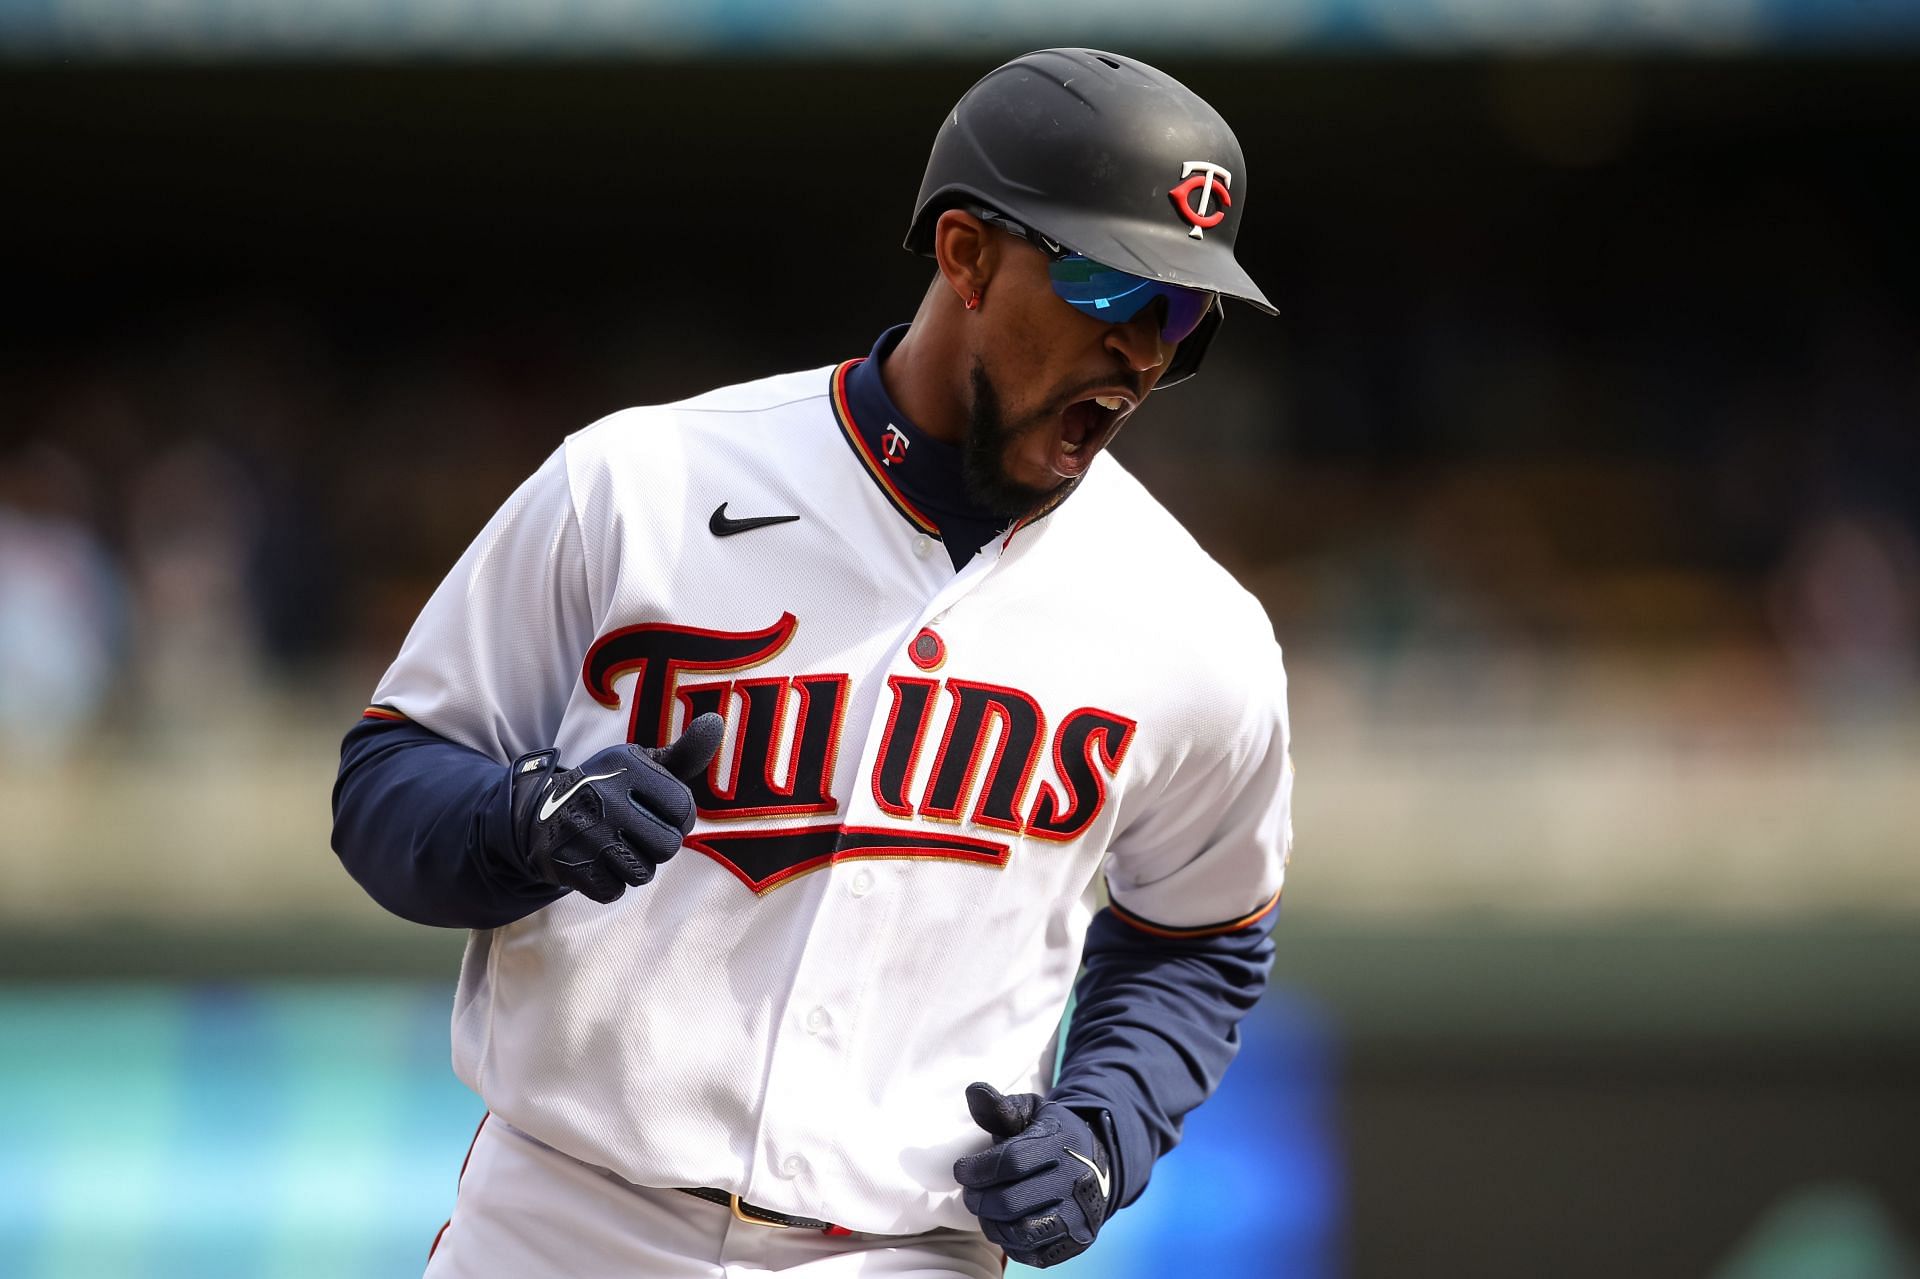 Who is Byron Buxton? Why is he in the discussion amongst the best